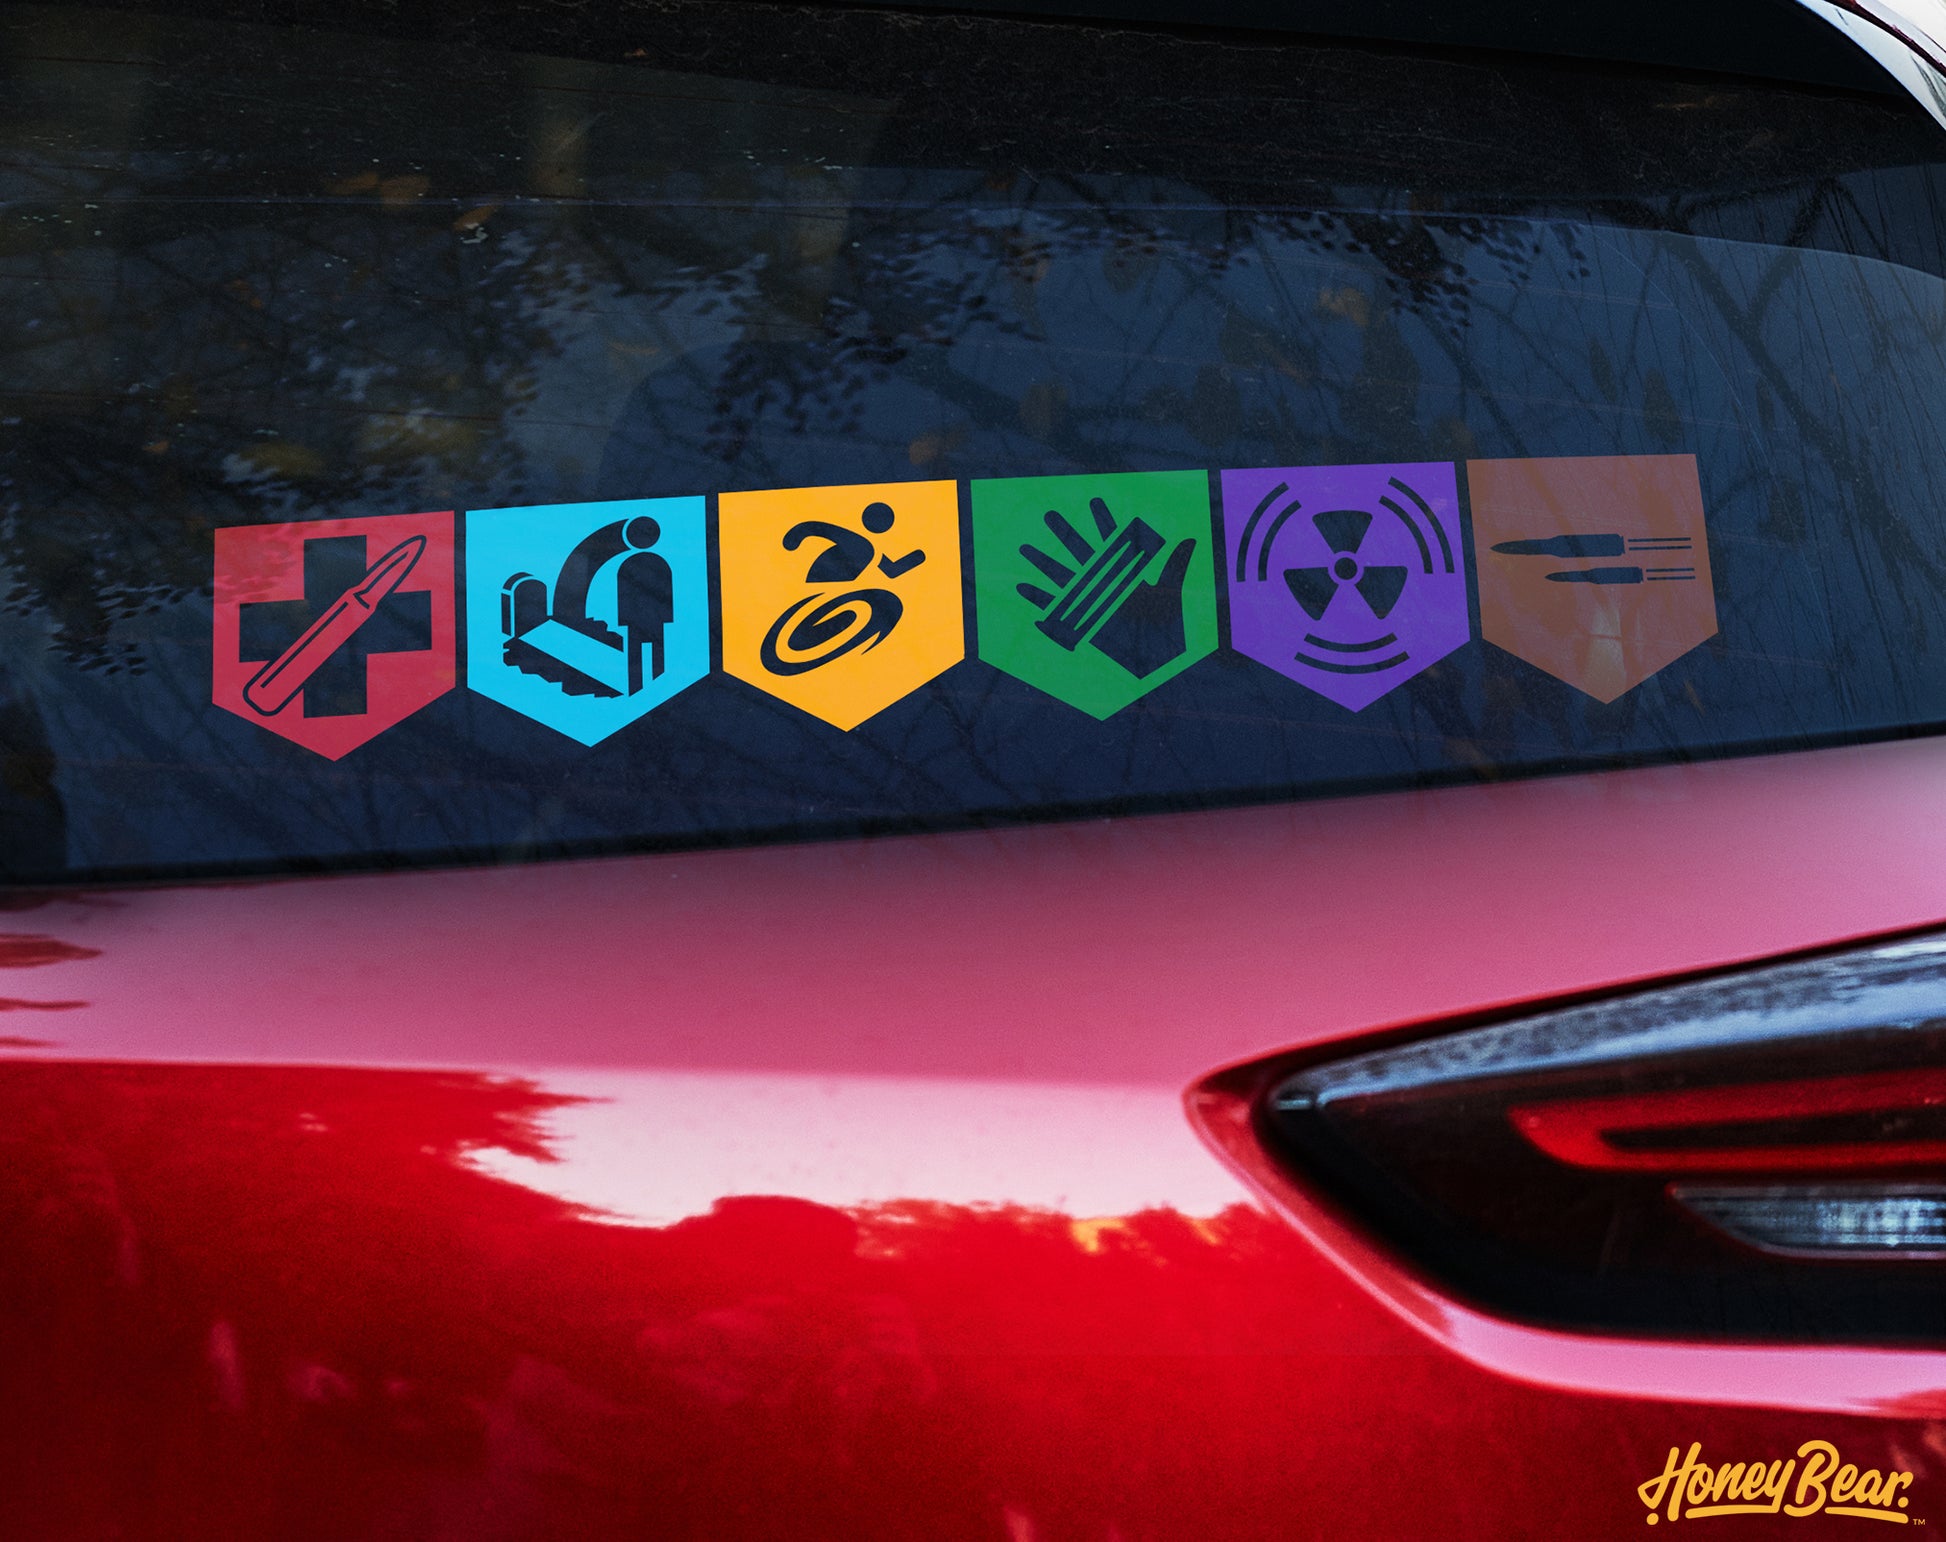 Premium quality vinyl car decals set, featuring a range of designs based on popular zombie game perks.